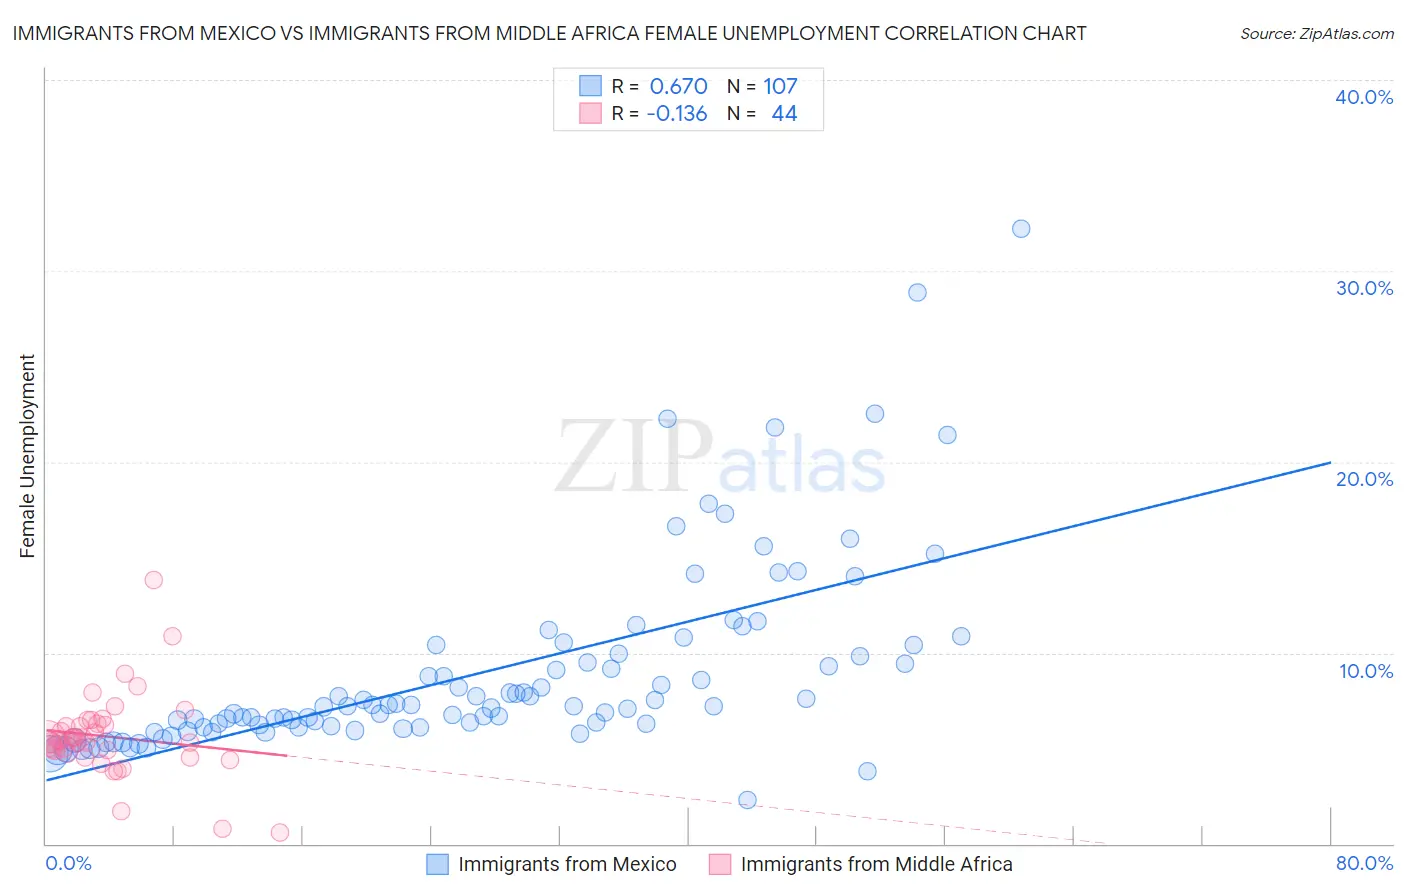 Immigrants from Mexico vs Immigrants from Middle Africa Female Unemployment